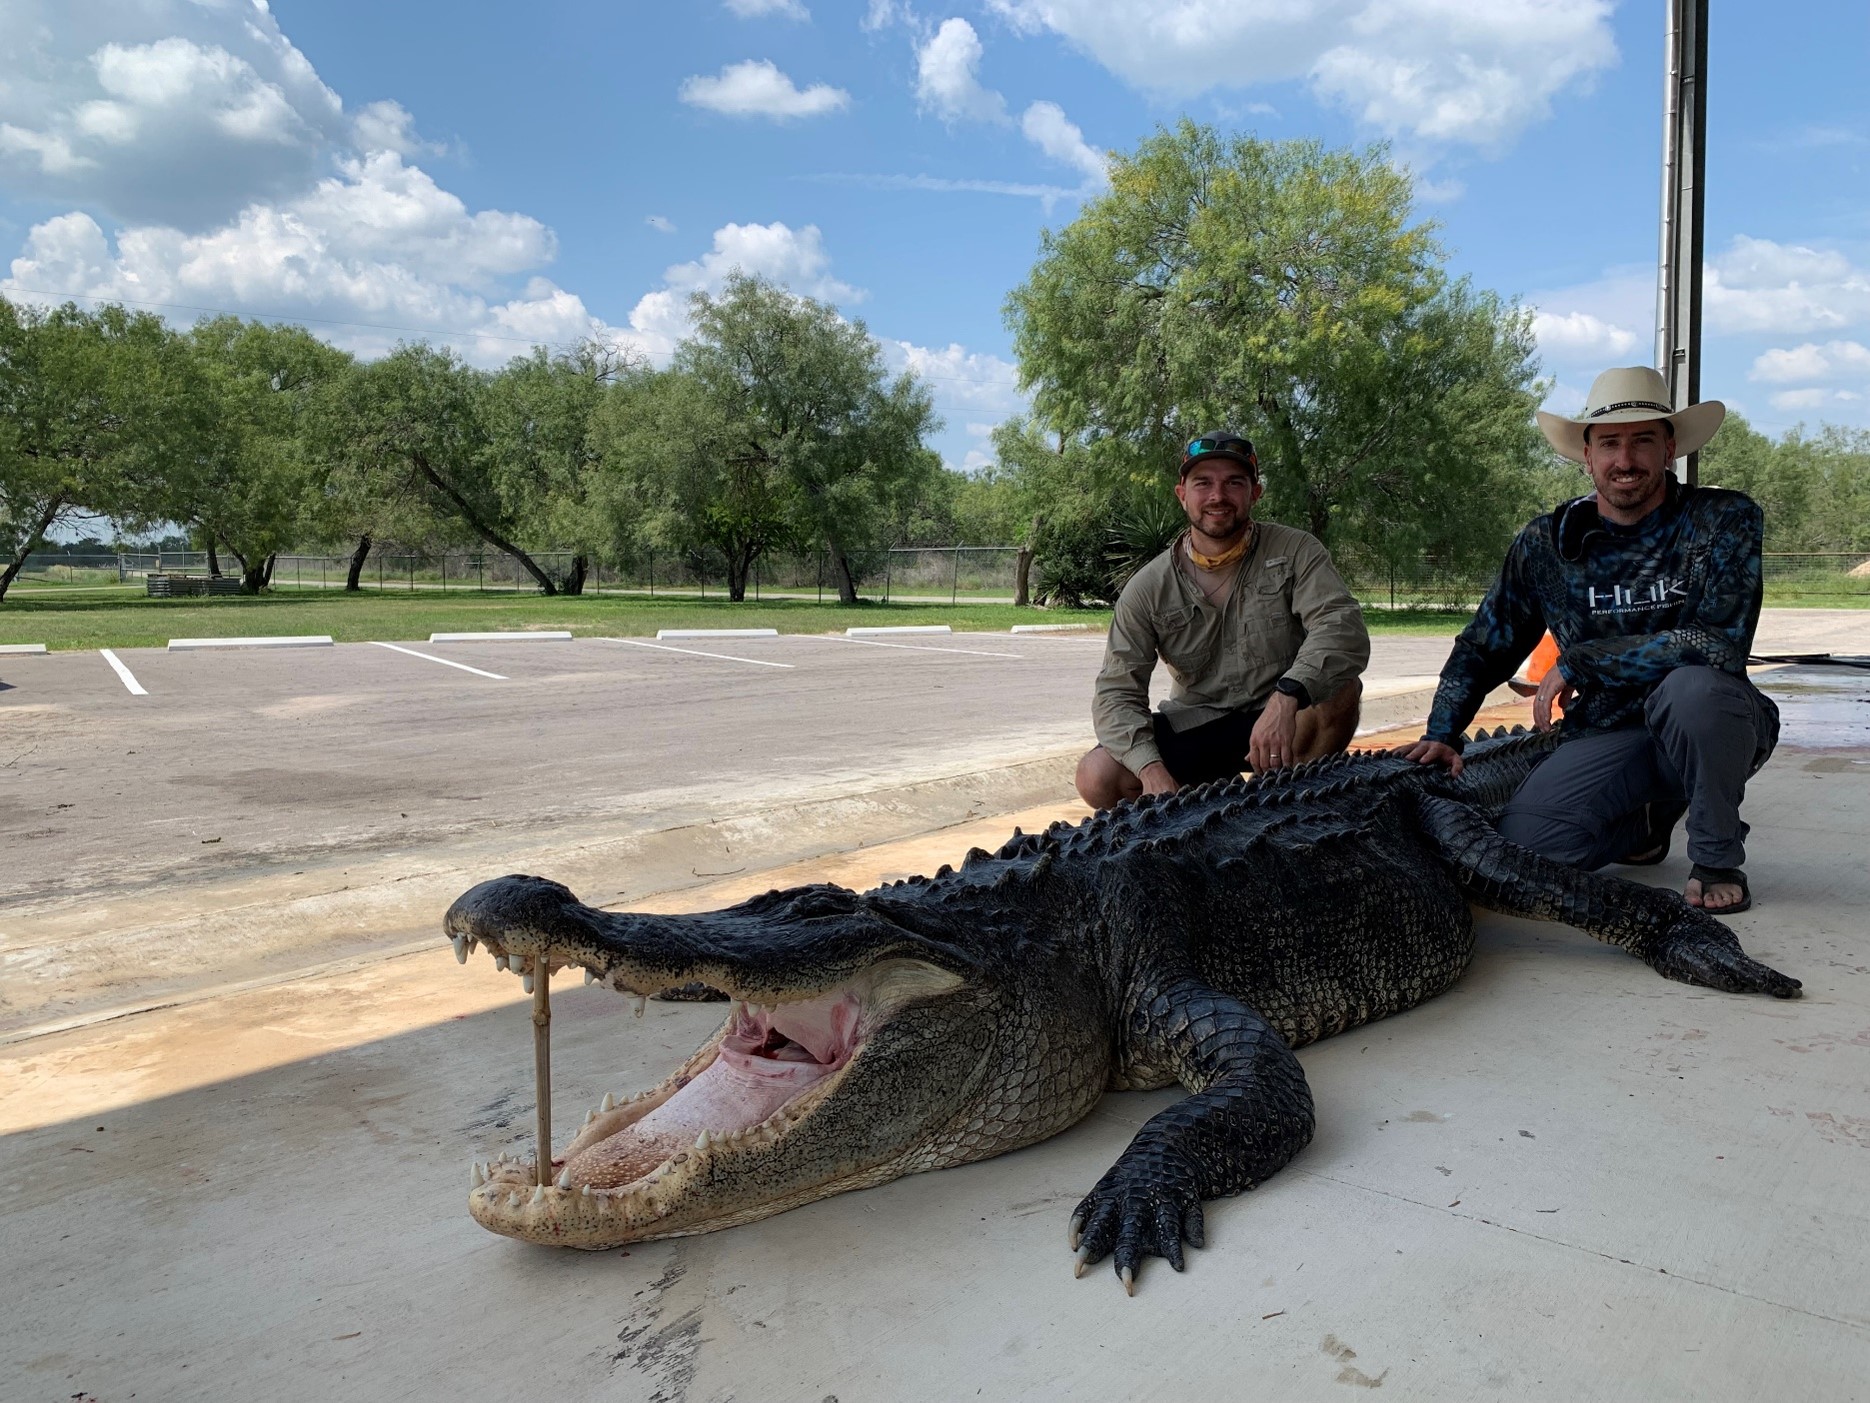 Giant 'Once in a Lifetime' 14-Foot Alligator Caught by Texas